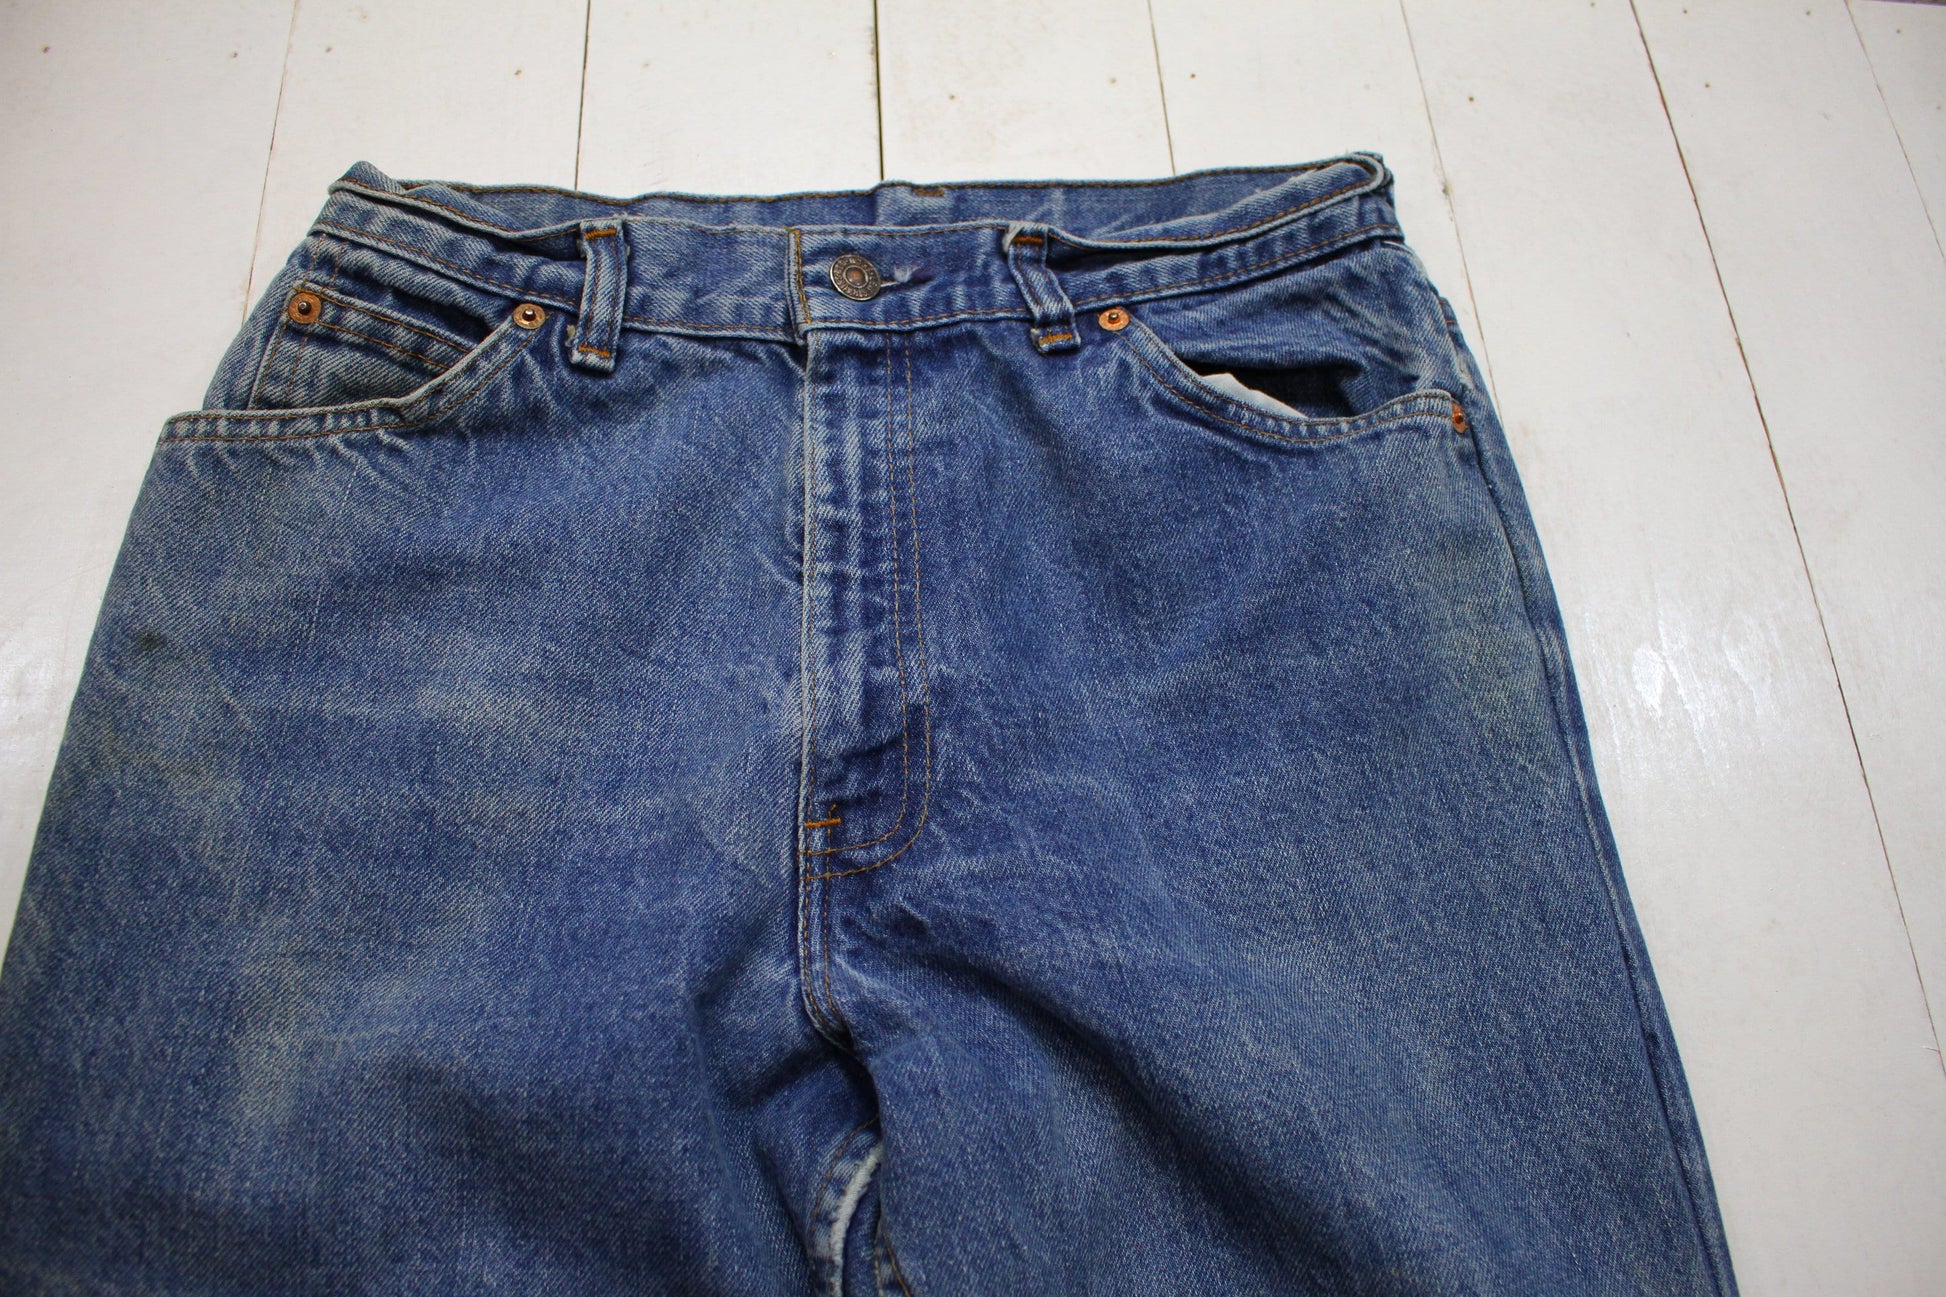 1980s Levi's White Label High Rise Blue Denim Jeans Made in USA Size 26x28.5